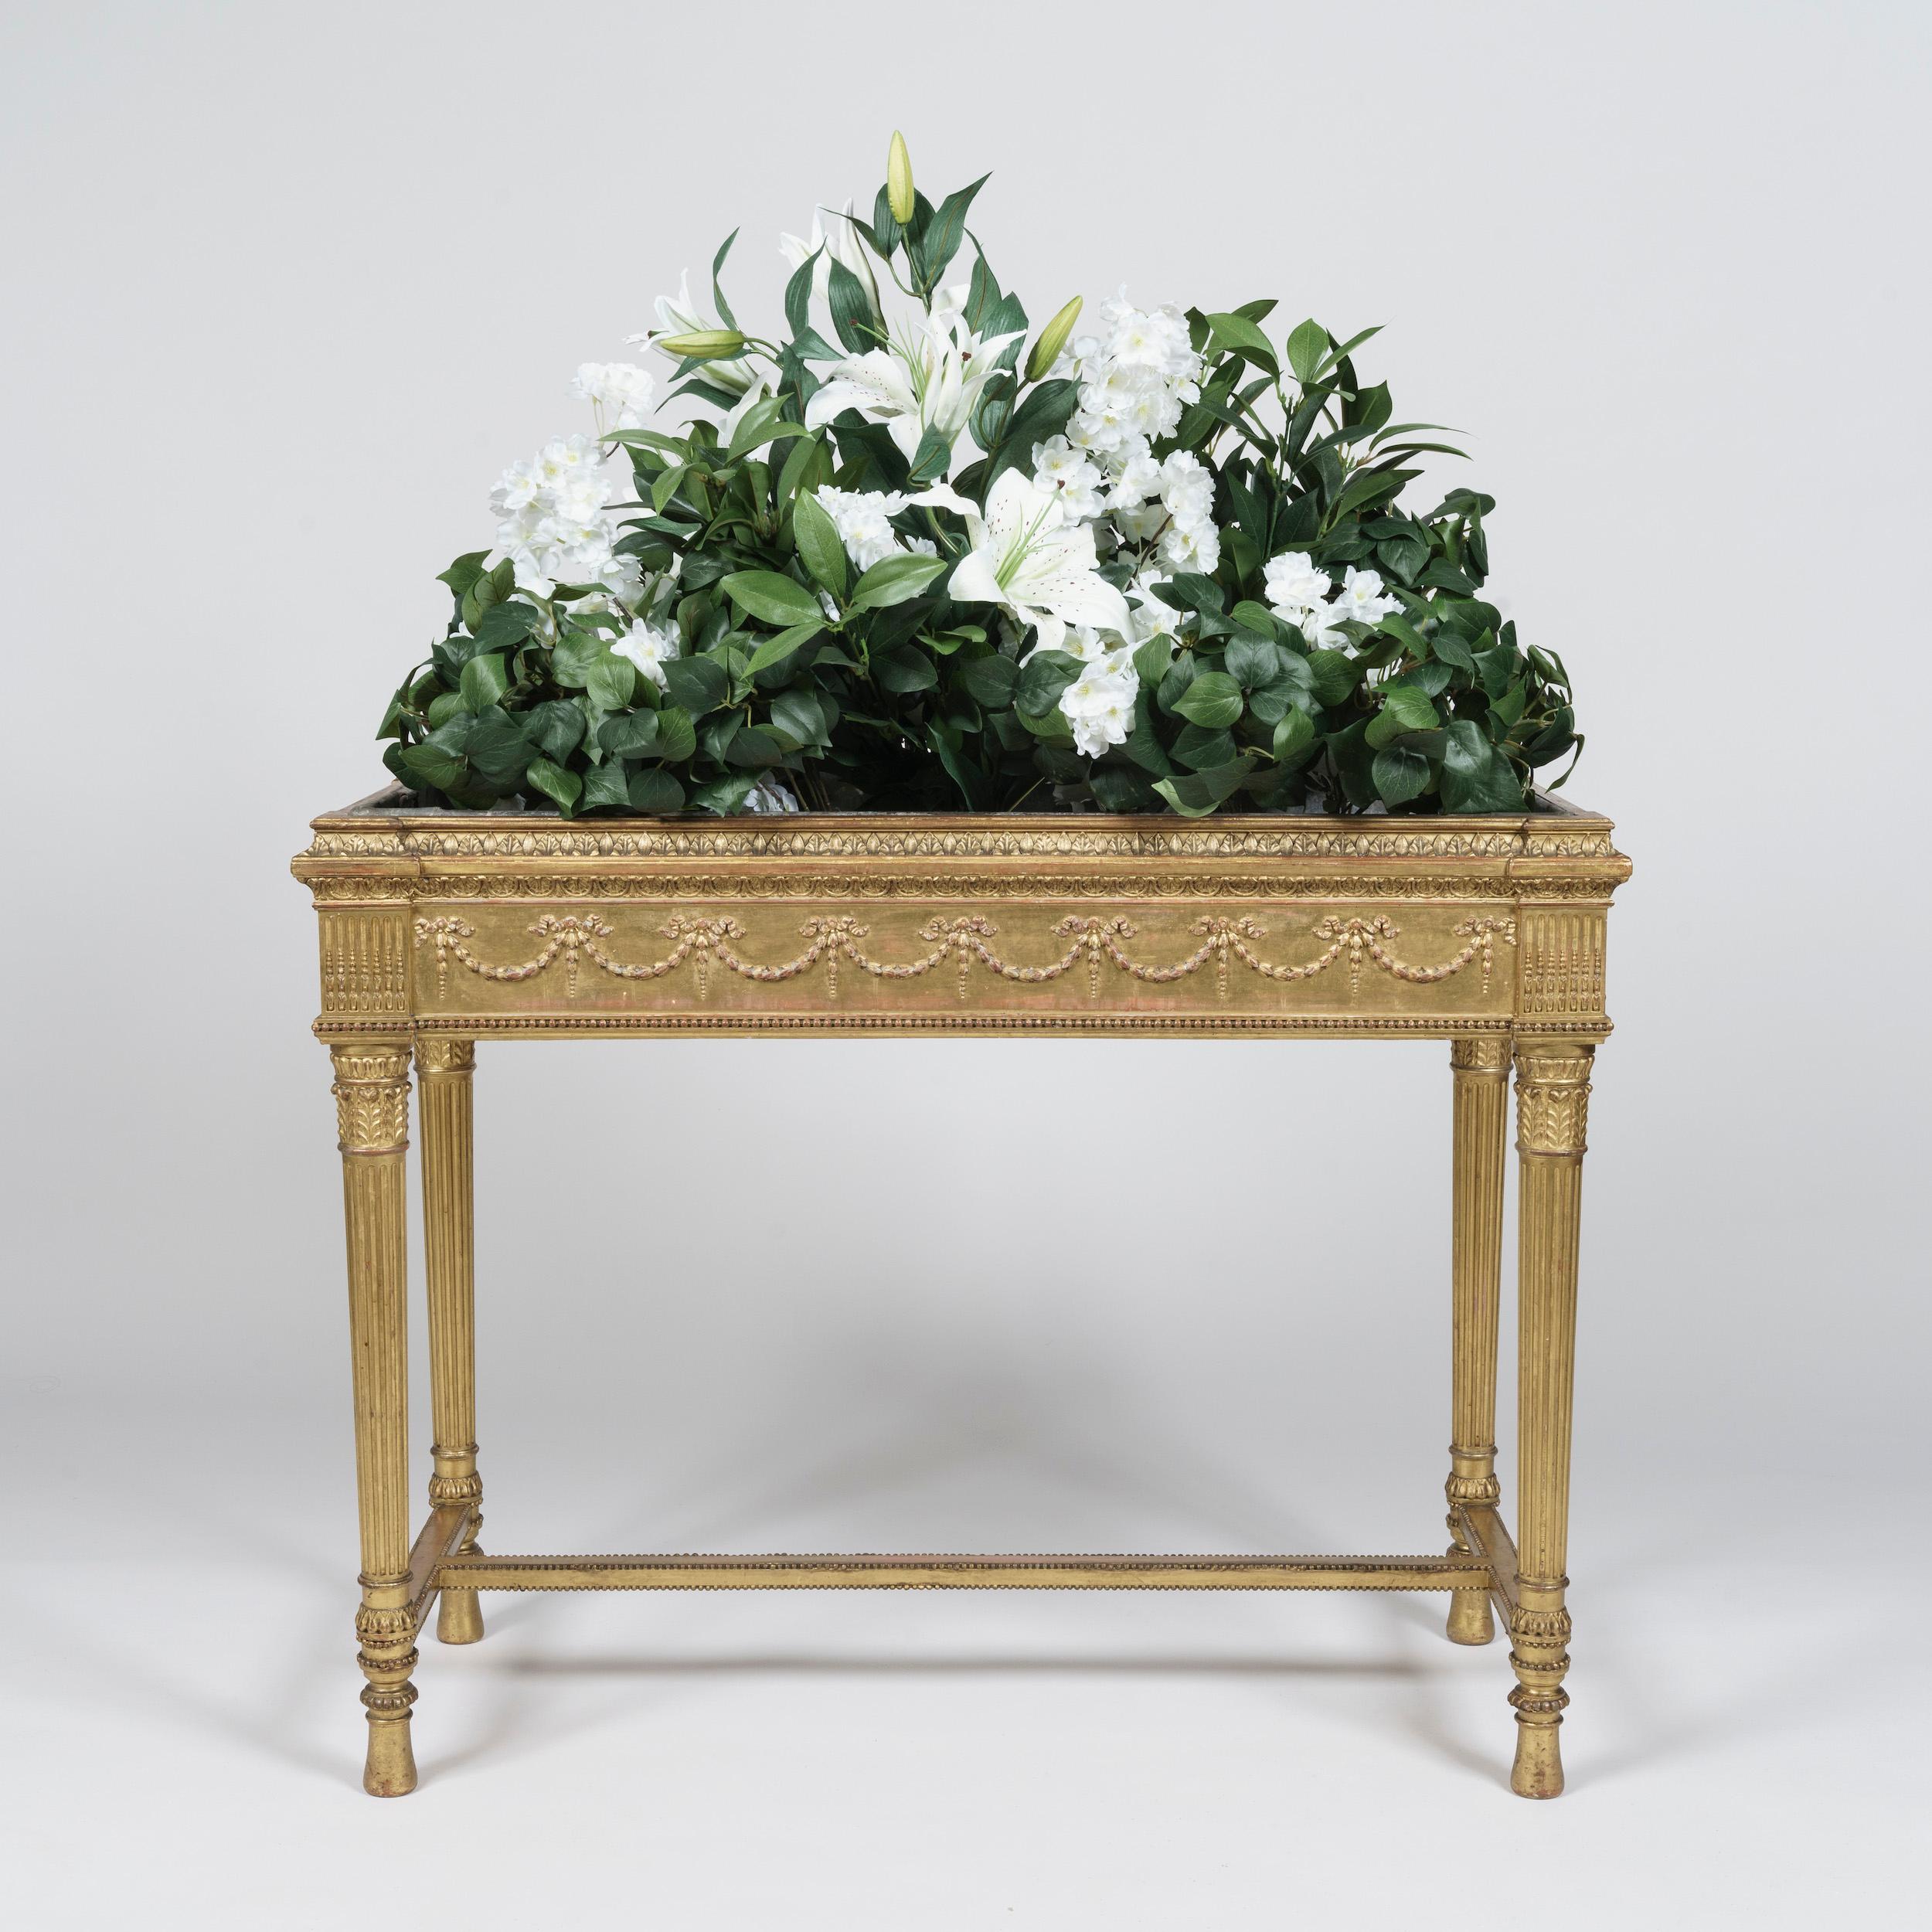 A pair of neo-classical
Giltwood Jardinières

Carved with refined detail and finished with gold leaf water-gilding, the fluted tapering legs joined together with a beaded H-stretcher, the acanthus-carved capitals supporting the zinc-lined